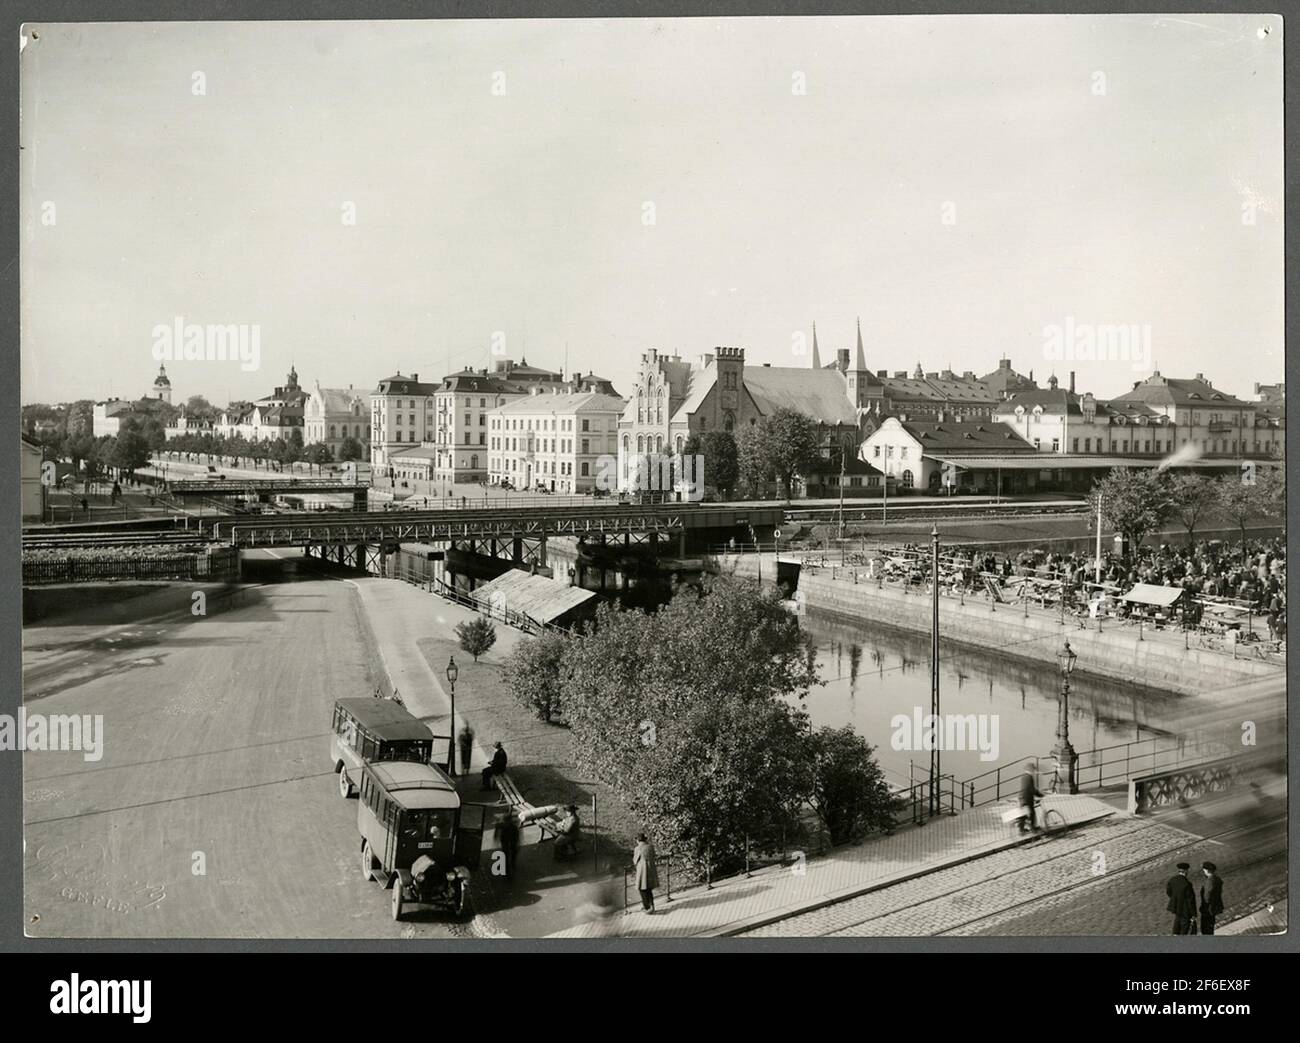 View of Gävle. 2 buses probably GMC bus we see in the picture. Stock Photo